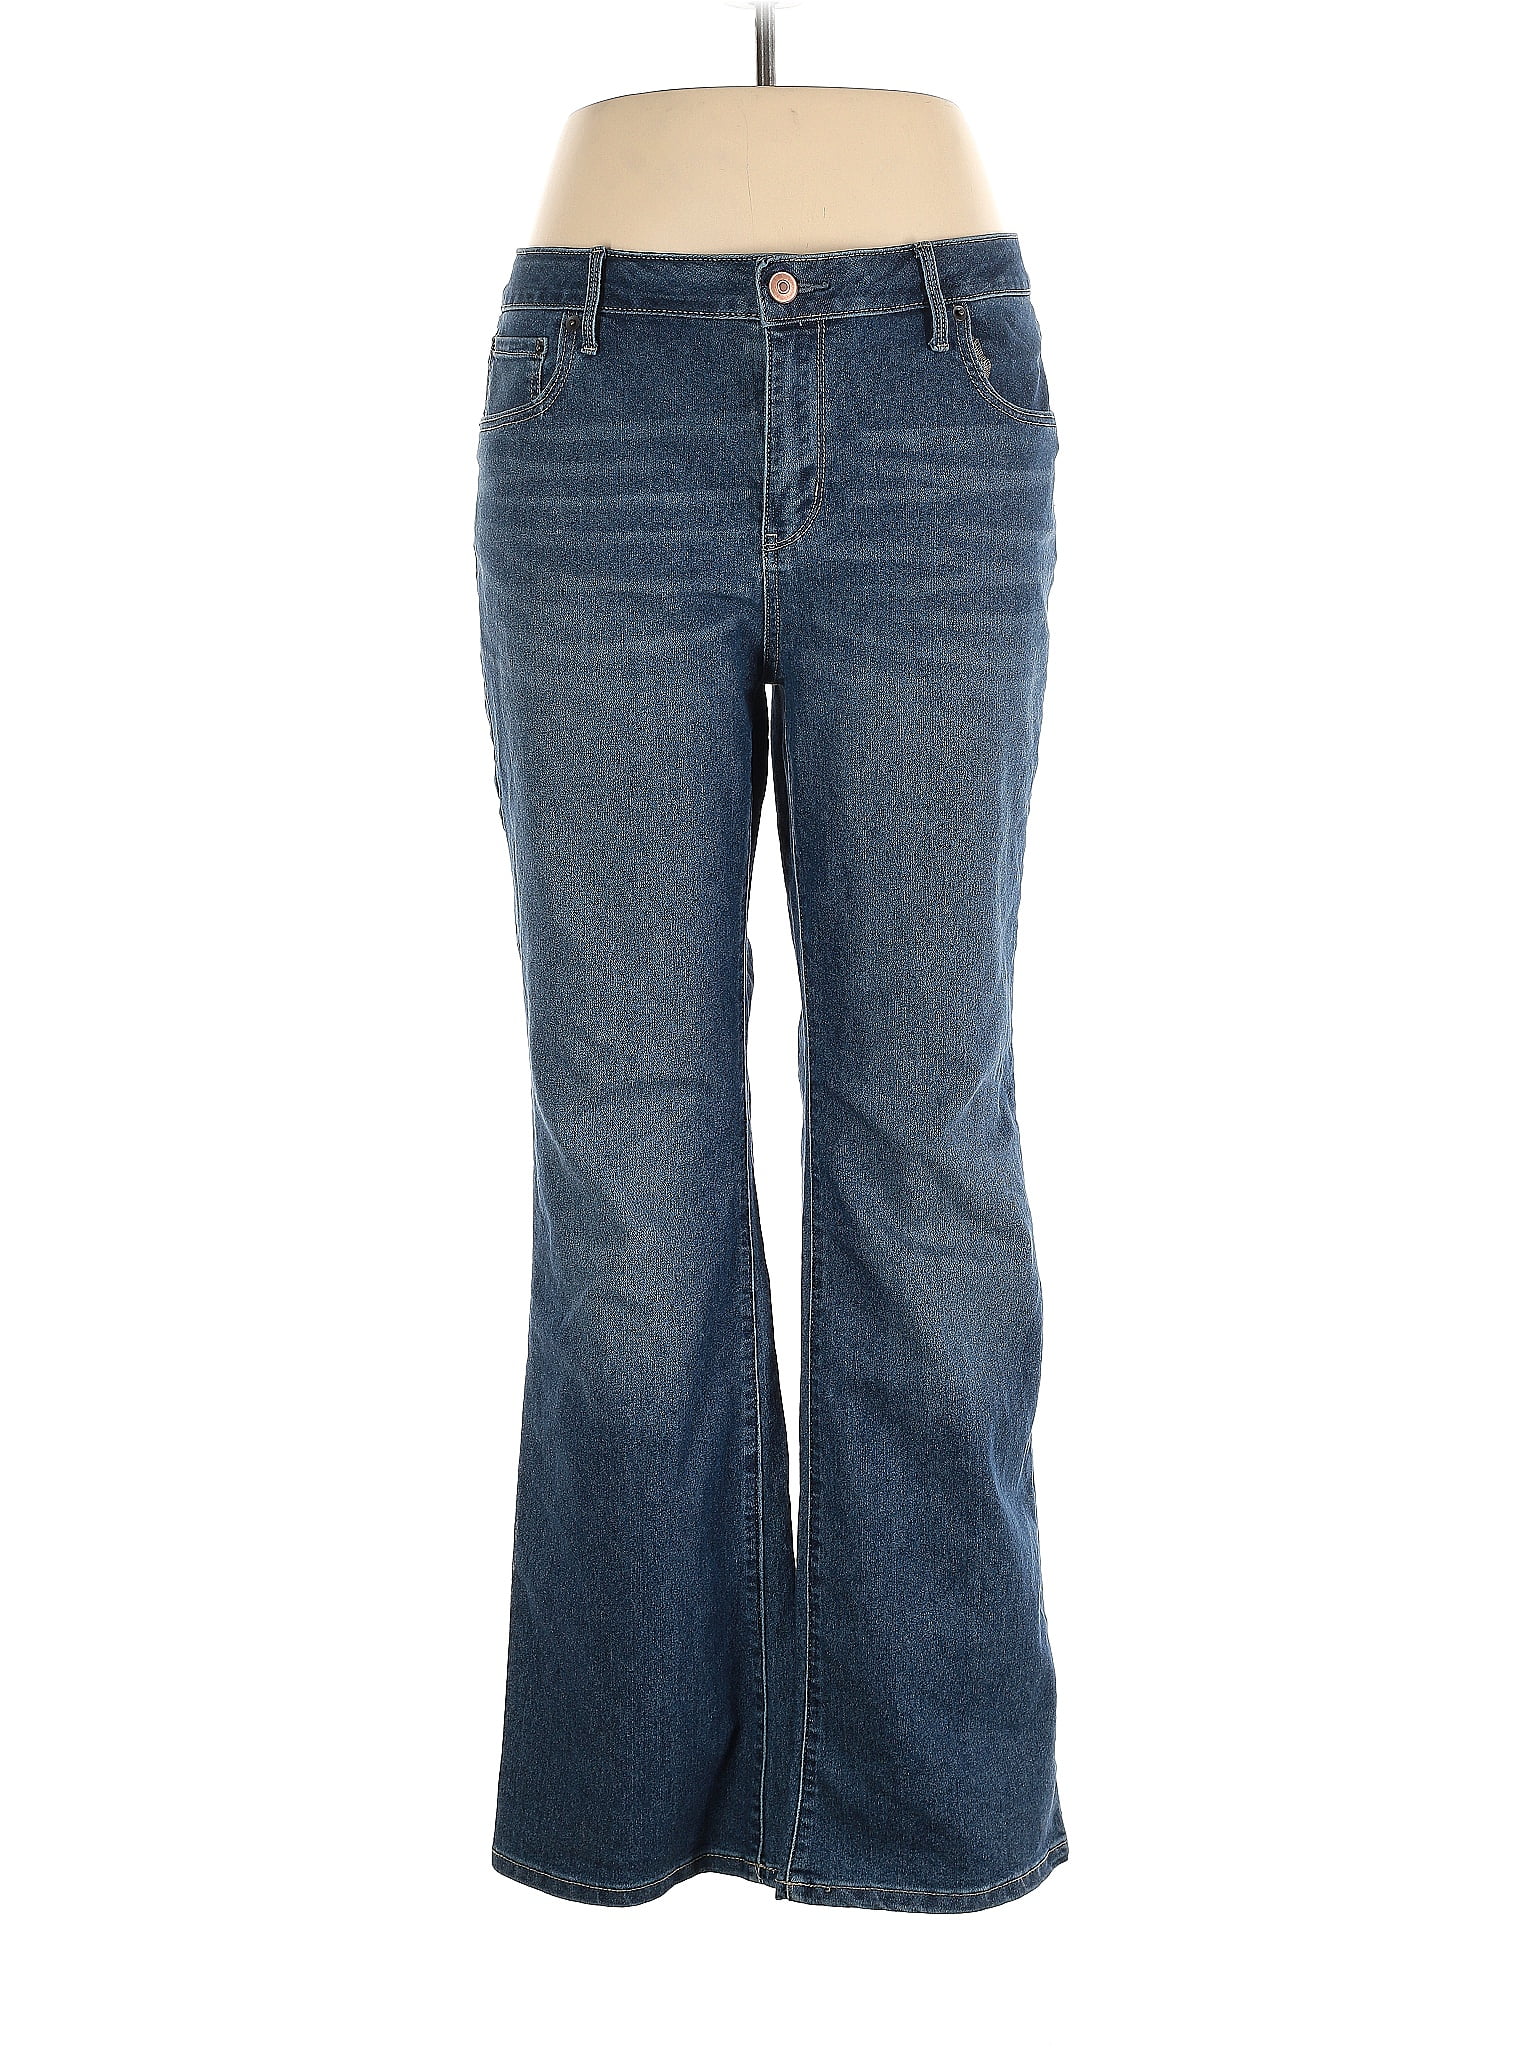 No Boundaries Junior's Light Wash Mid Rise Bootcut Jeans - 17 Blue at   Women's Jeans store